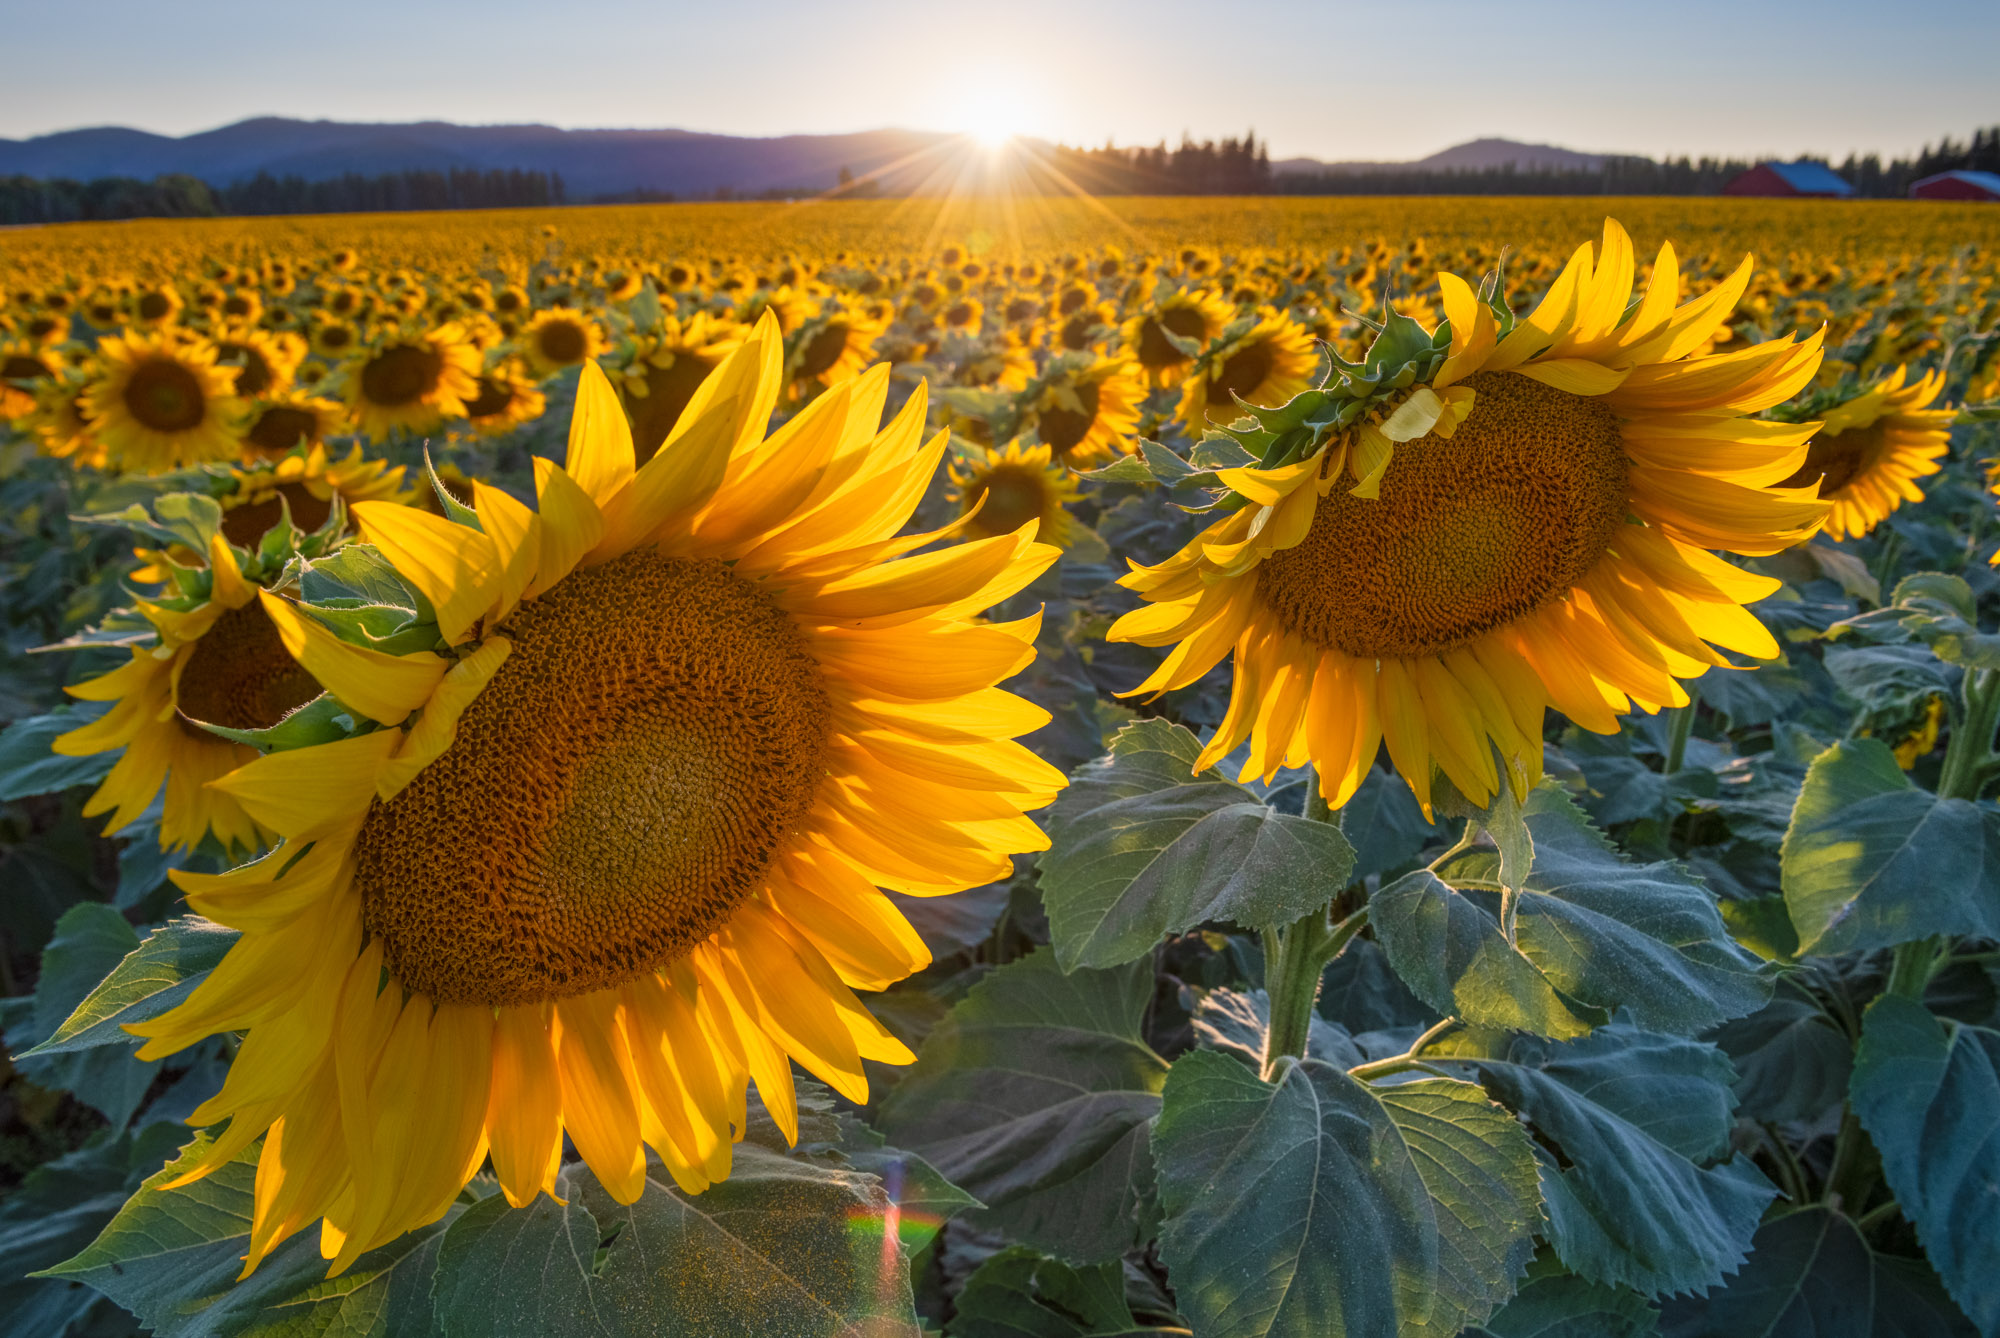 Sunlight illuminates the petals of sunflowers in Deer Park, Washington north of Spokane. Farmers cultivate sunflowers in this...